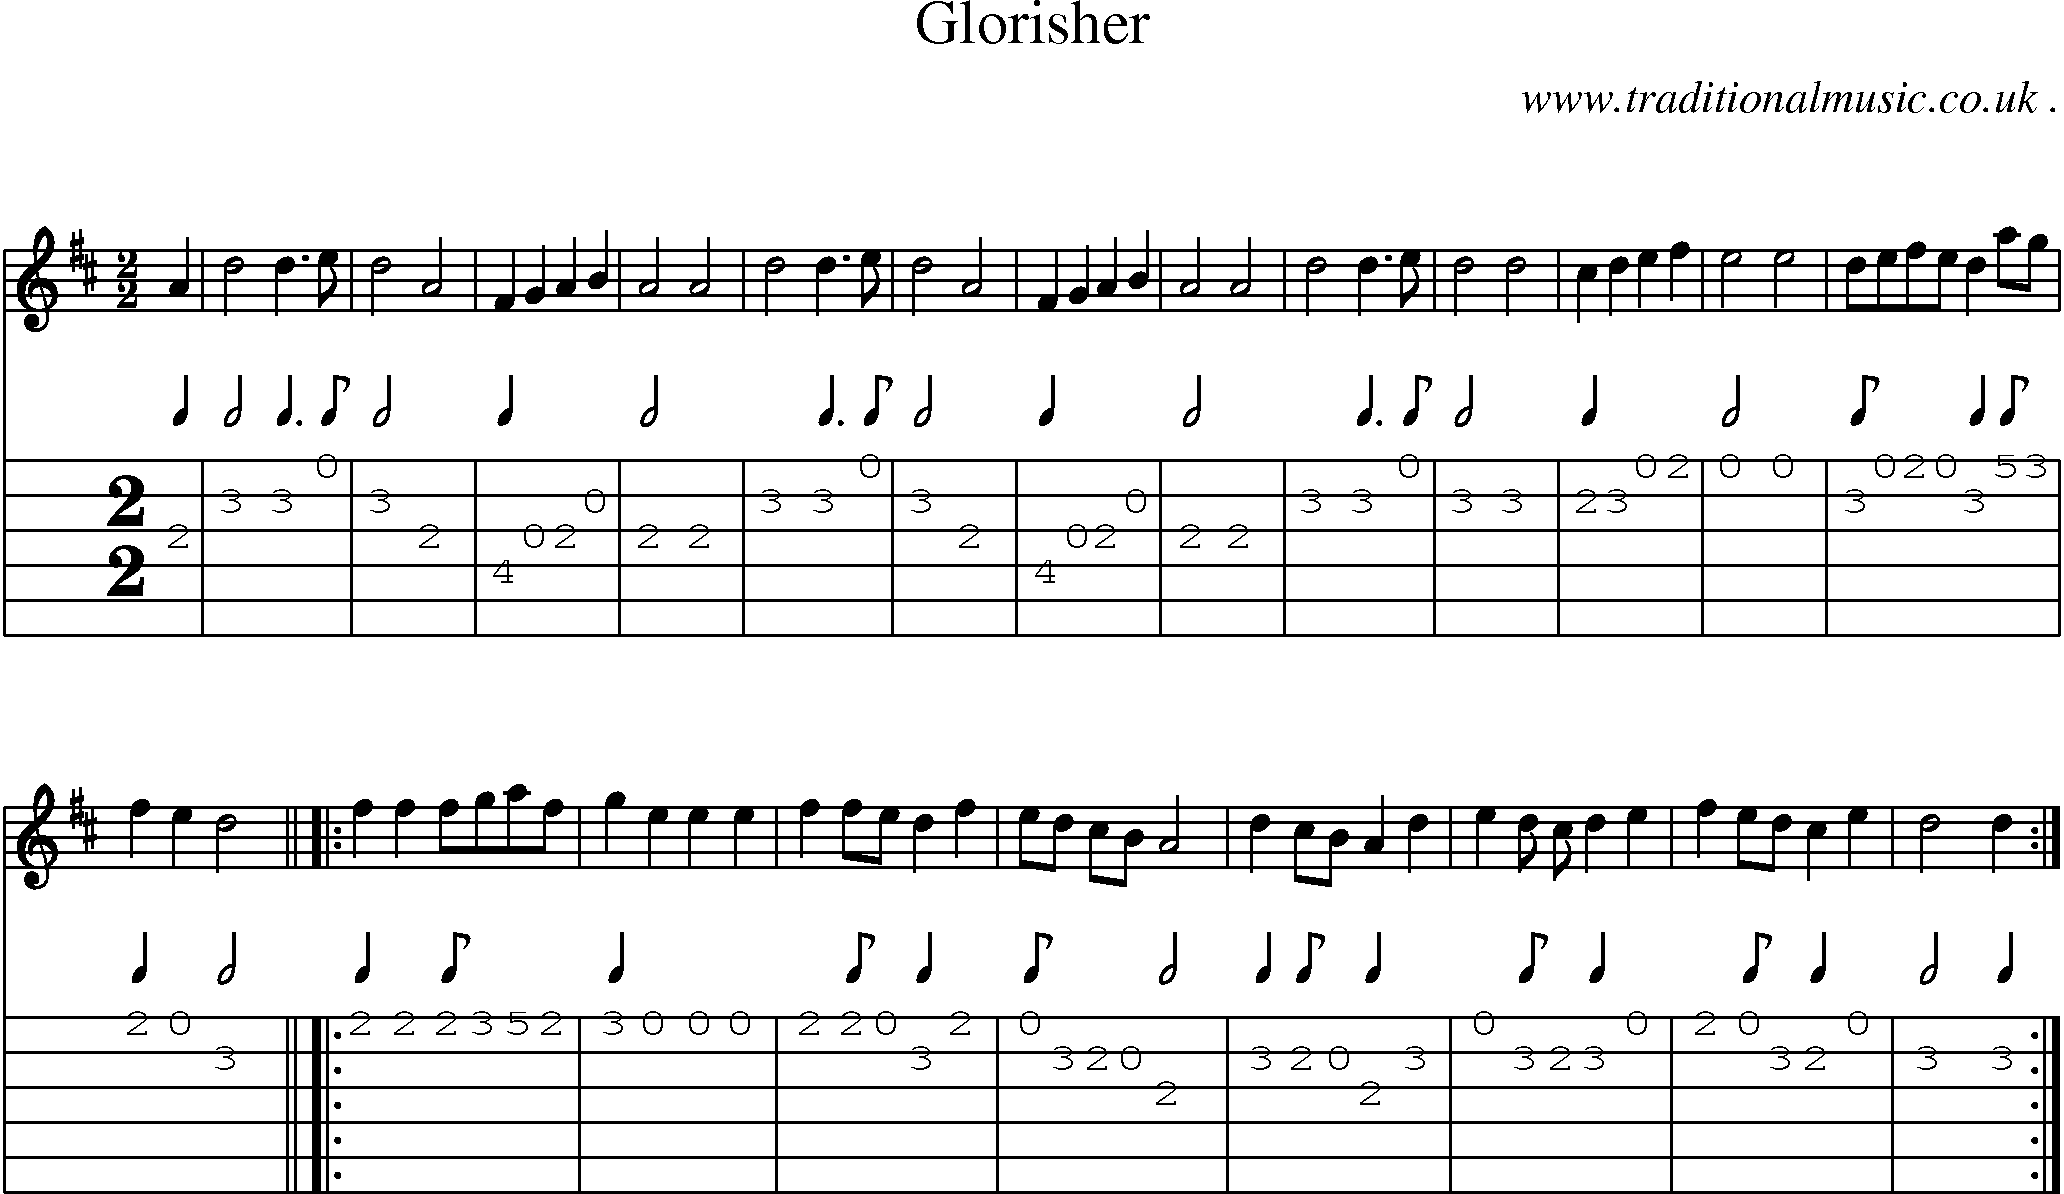 Sheet-Music and Guitar Tabs for Glorisher